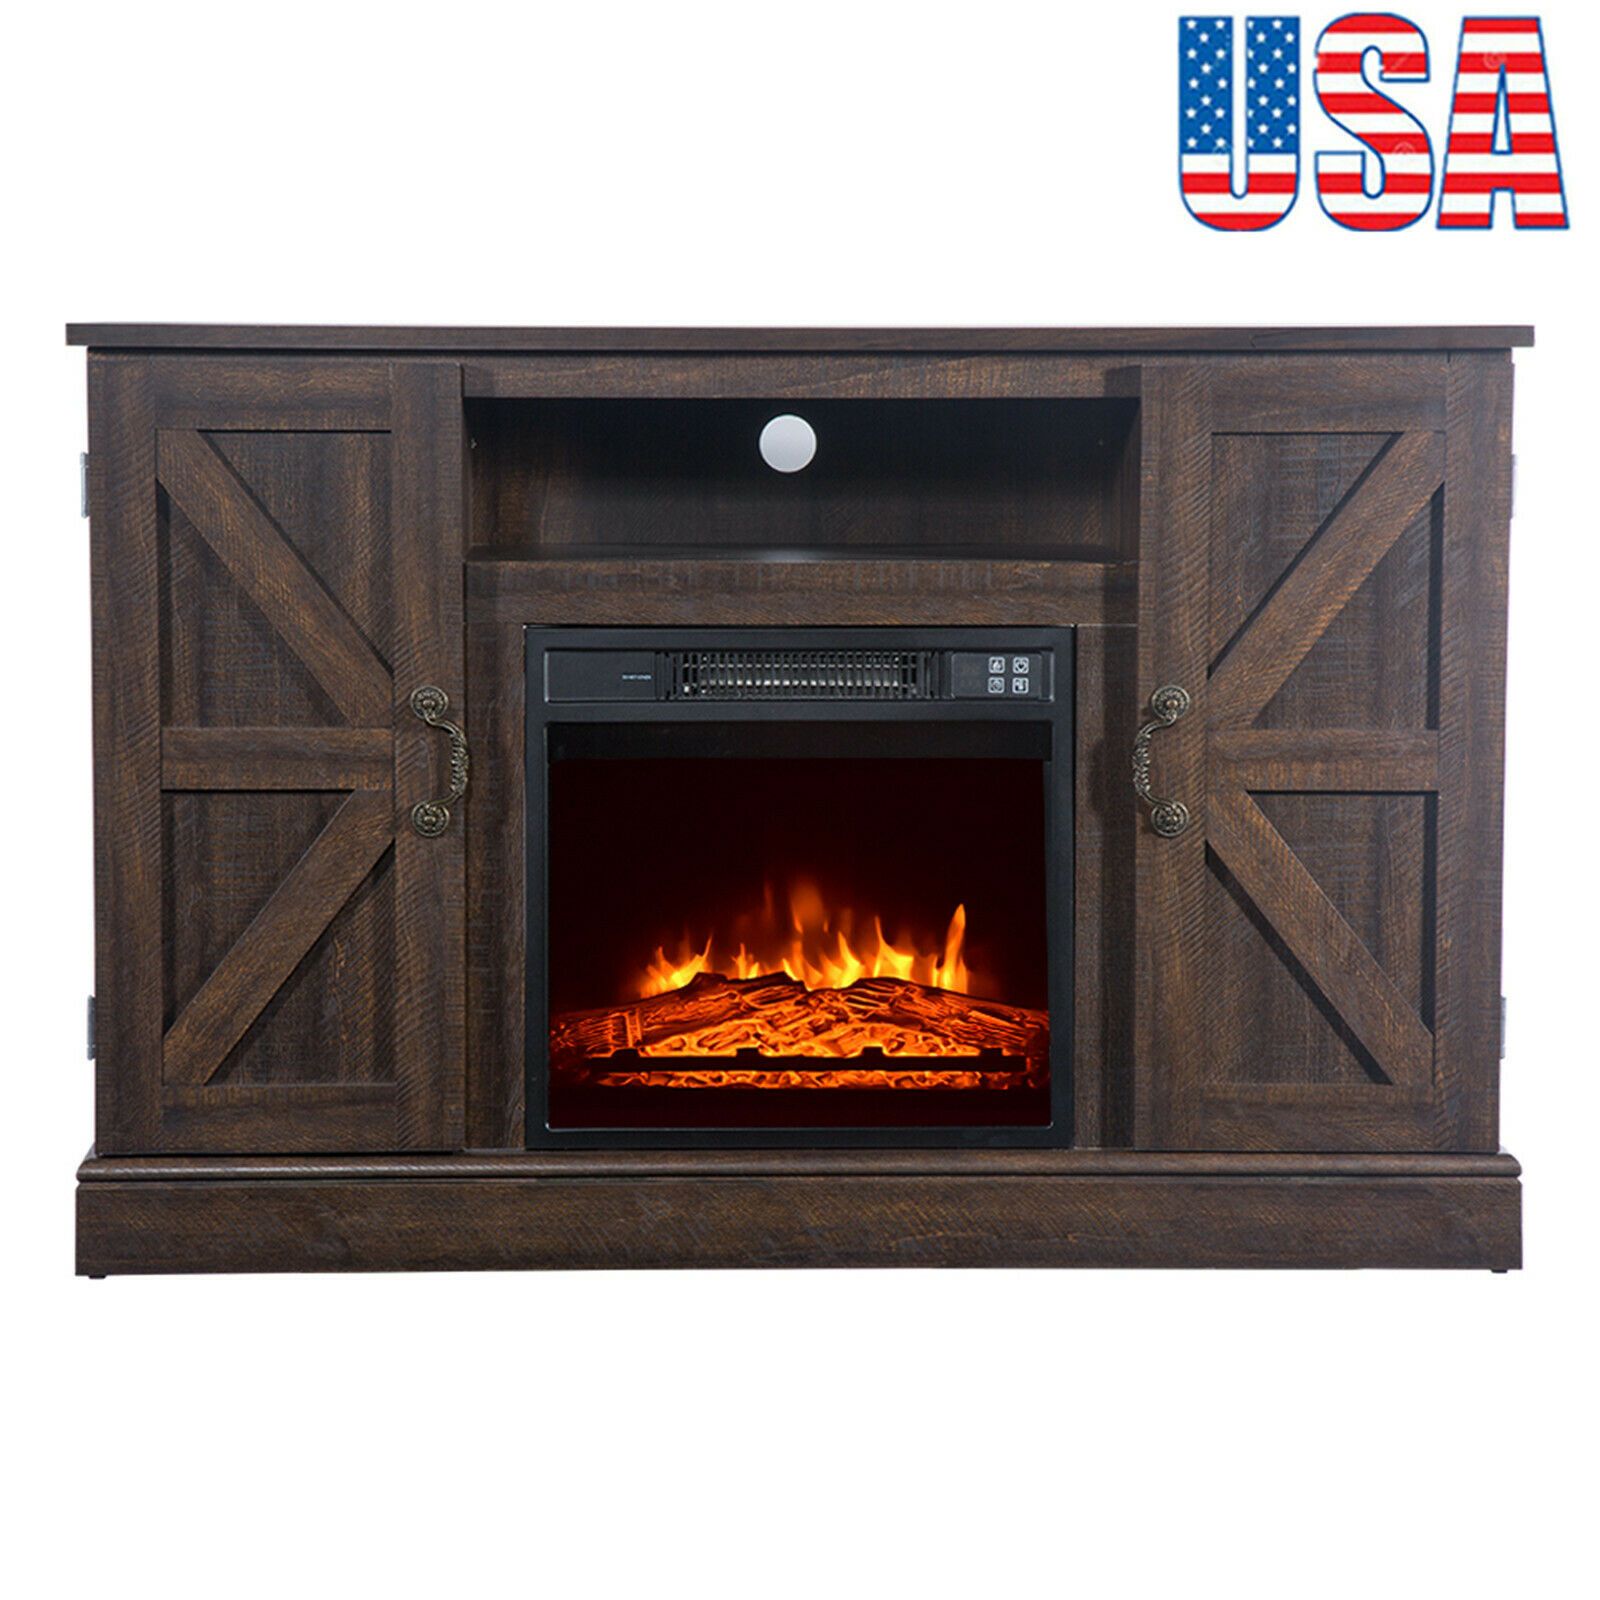 New Arrival Rustic Wood Fireplace Tv Stand For 50 Intended For Rustic Grey Tv Stand Media Console Stands For Living Room Bedroom (View 10 of 15)